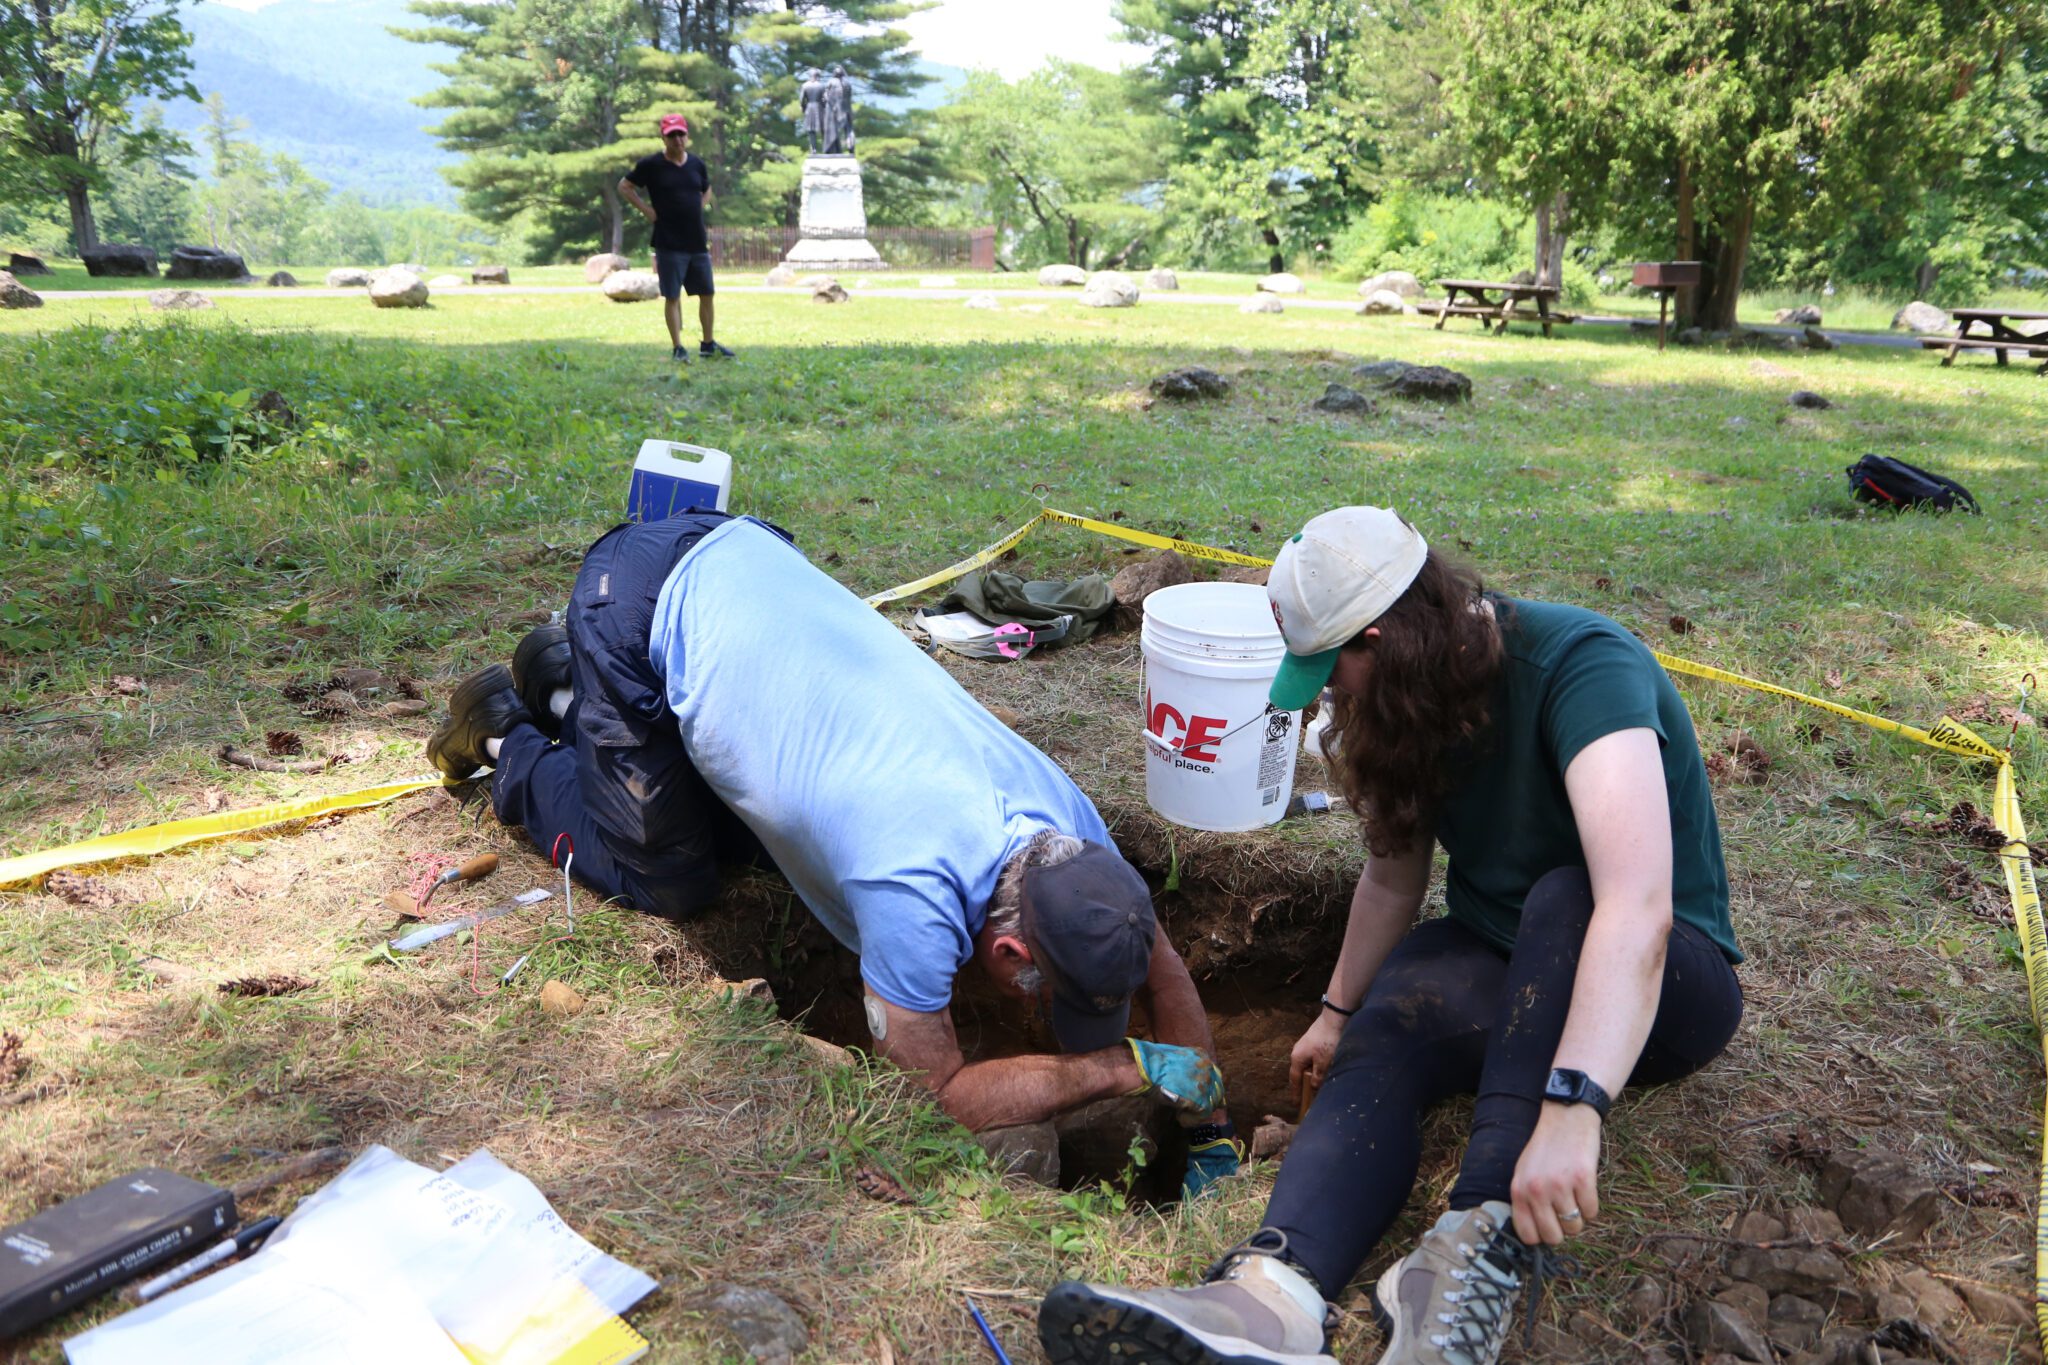 A bystander watches two people digging at the Lake George Battlefield